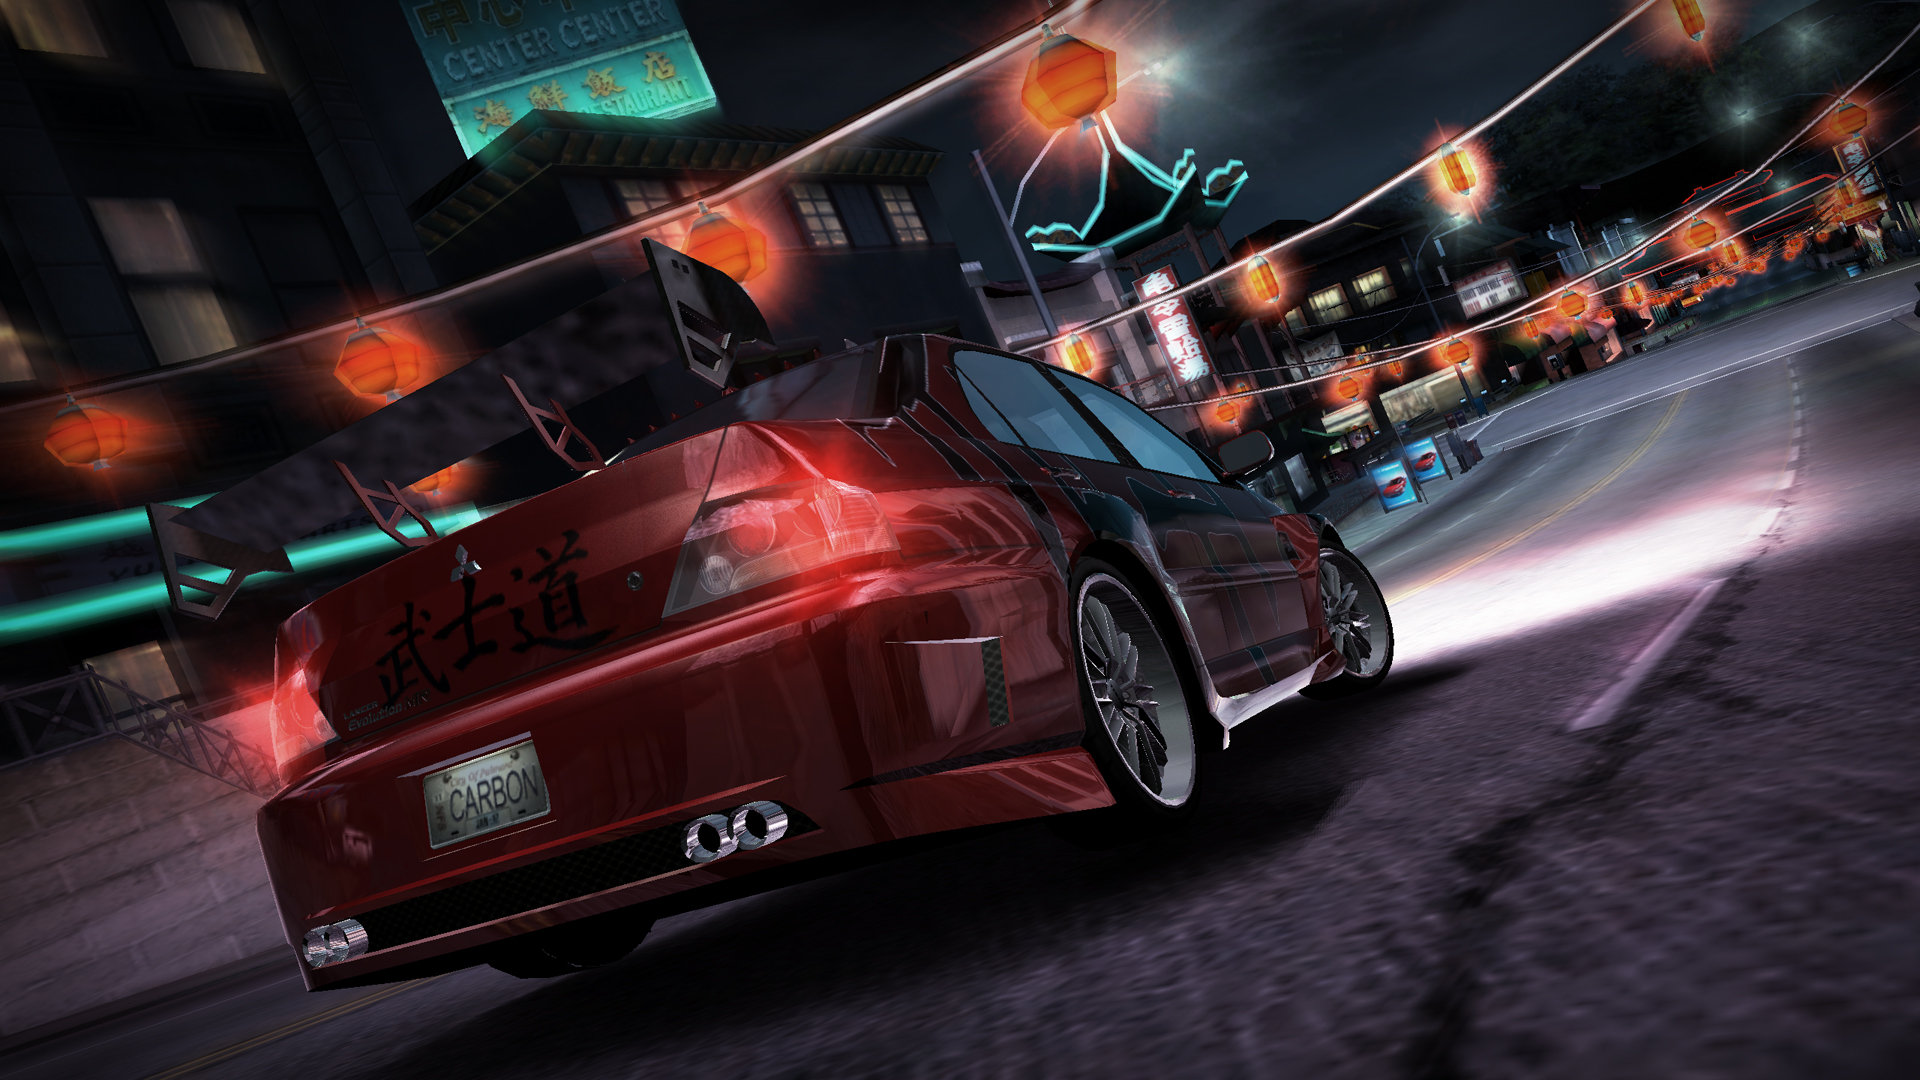 Need for Speed: Carbon: Collector's Edition